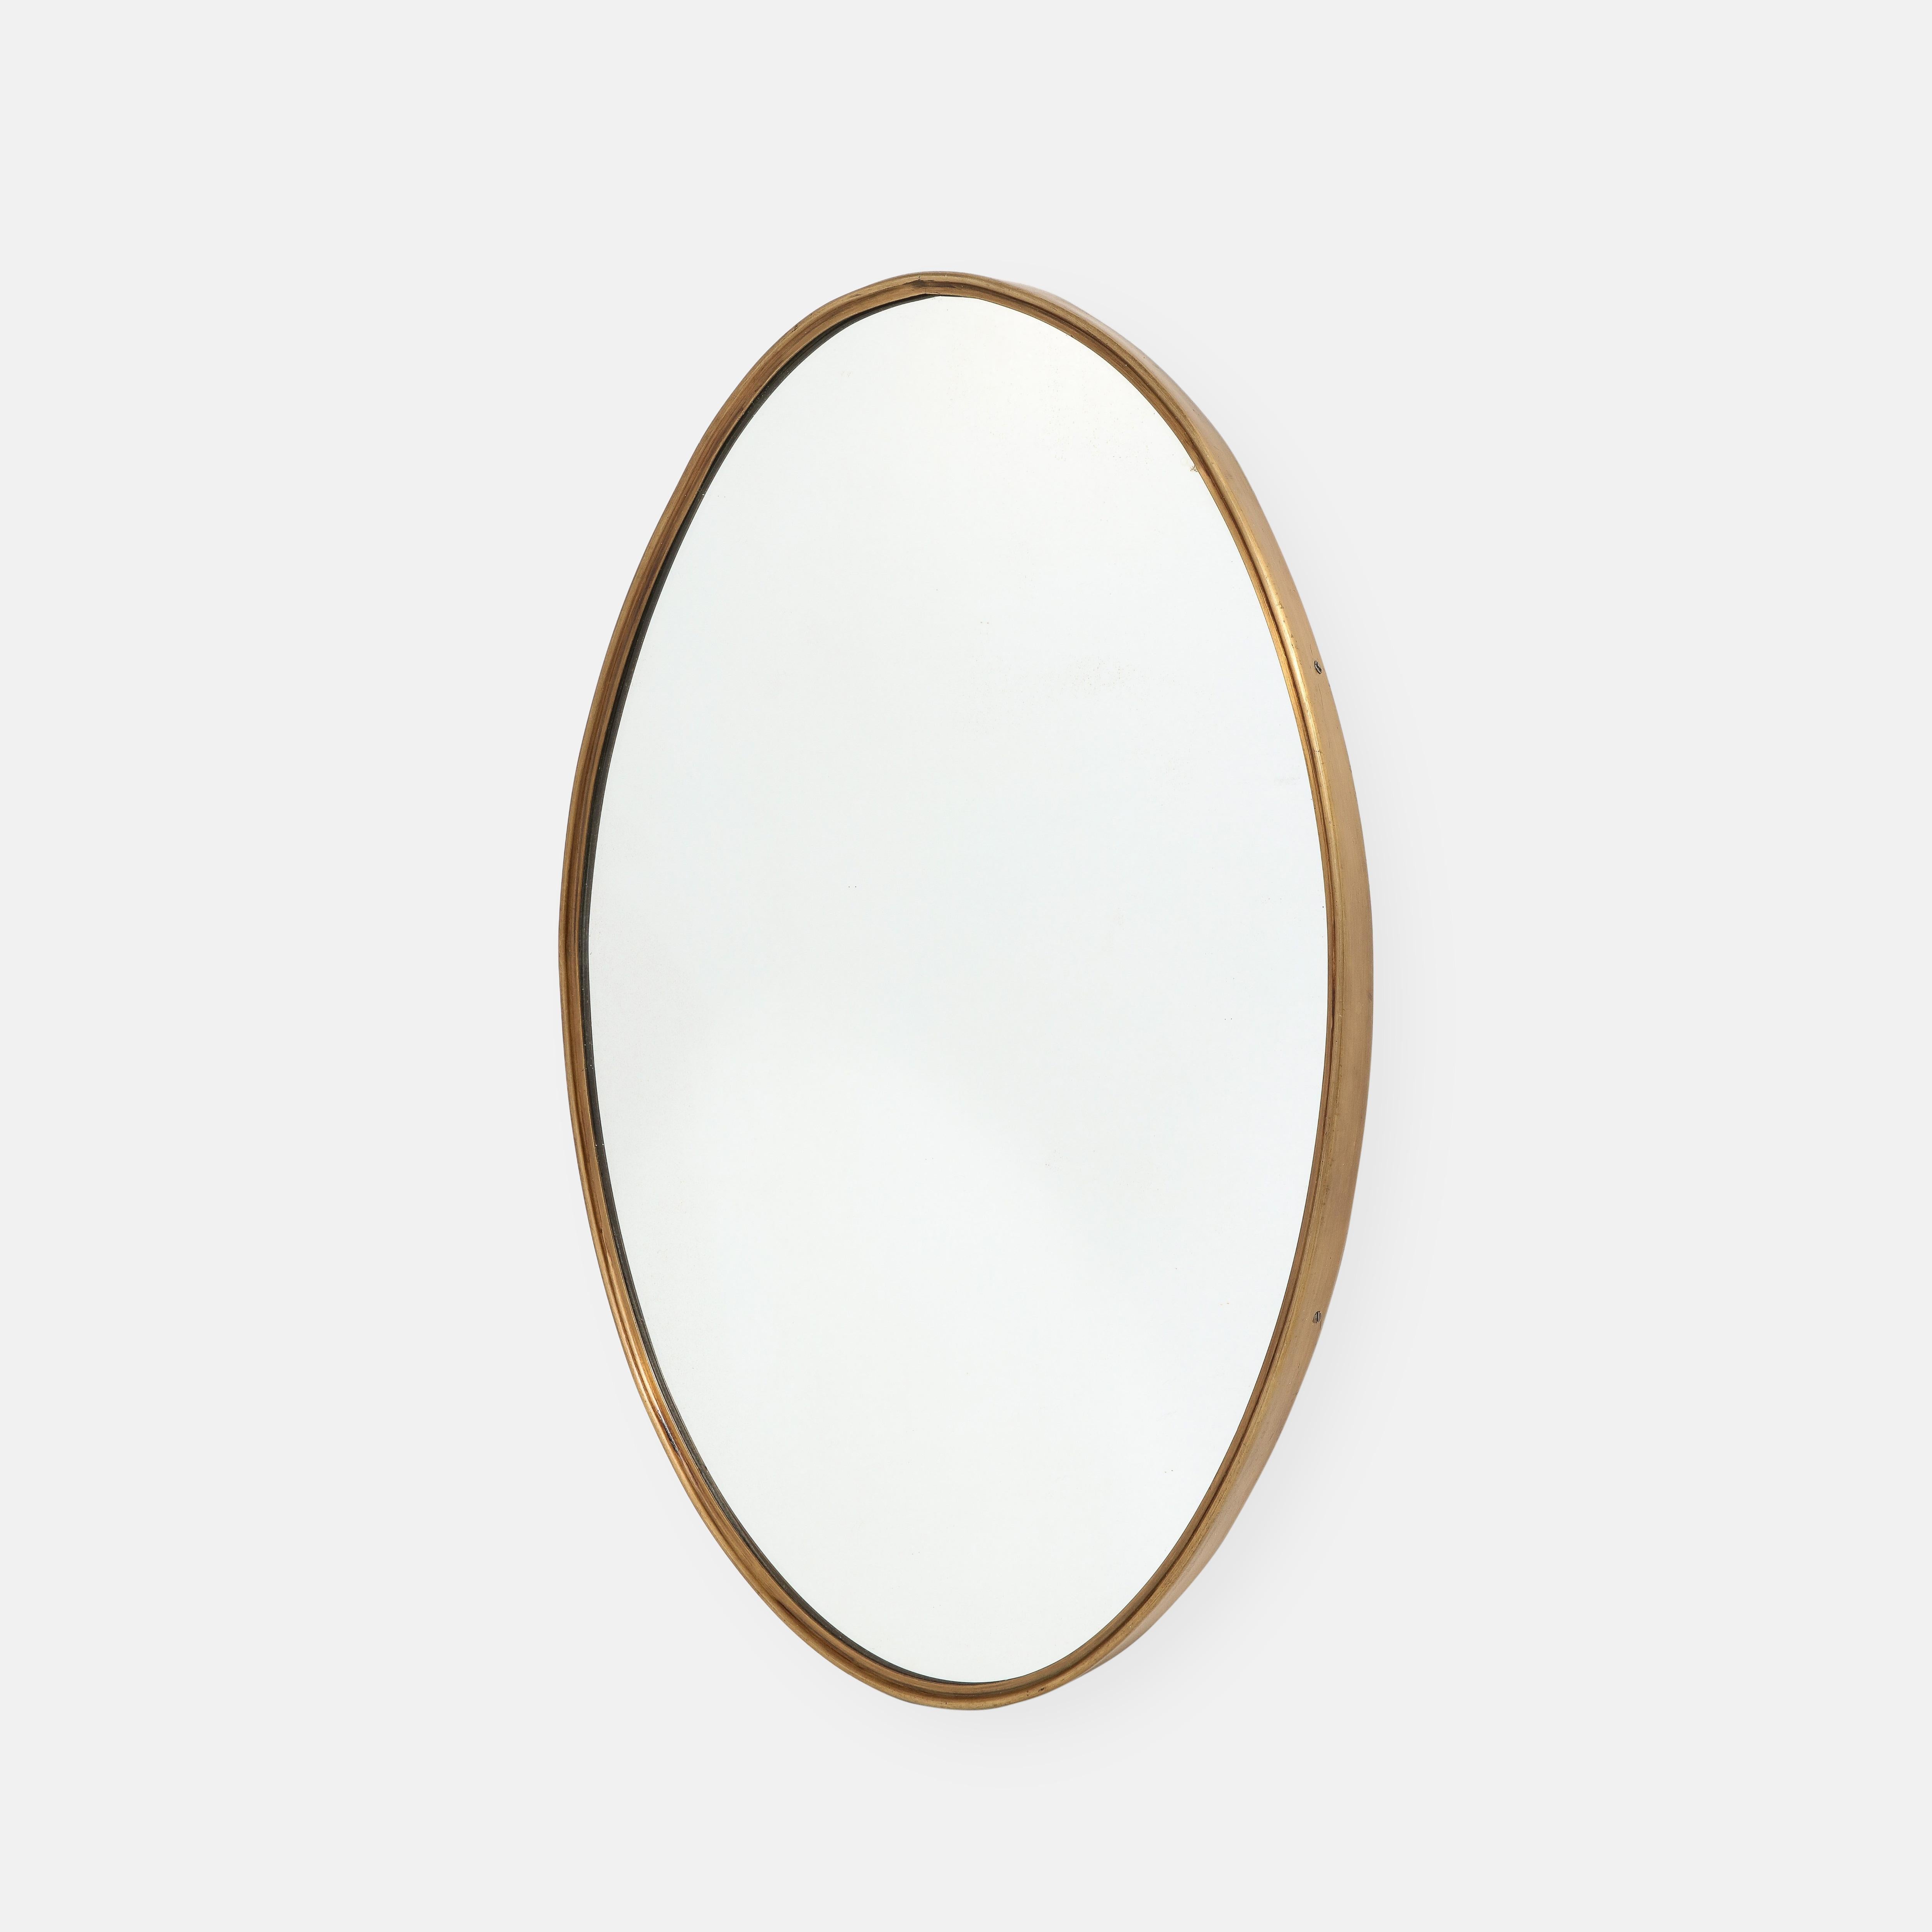 1950s Italian elegant oval brass wall mirror with a rich patina on the brass frame.  Finely constructed with wood backing.